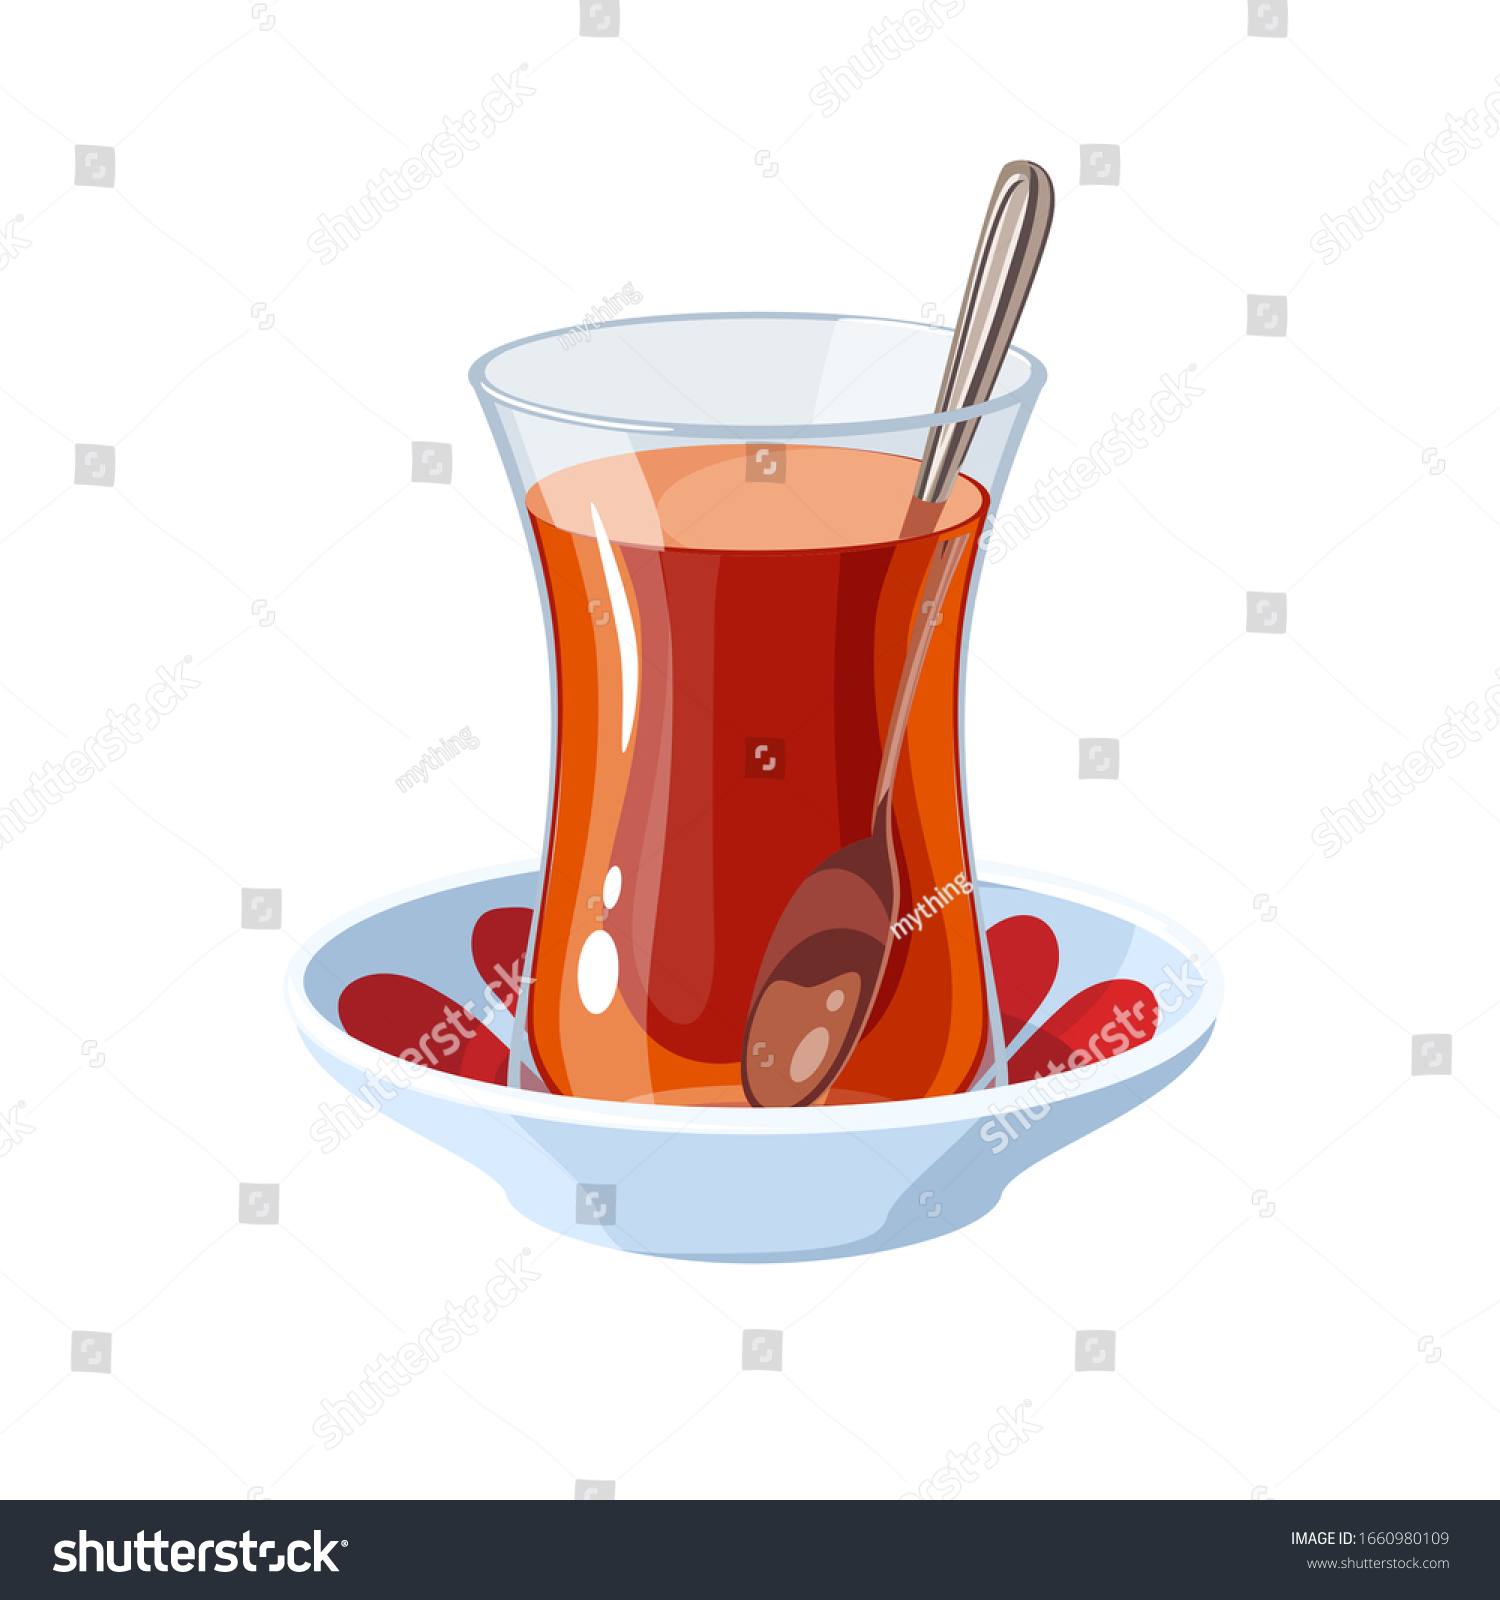 SVG of A glass of traditional Turkish tea with a teaspoon on a saucer. Vector illustration flat cartoon icon isolated on white. svg